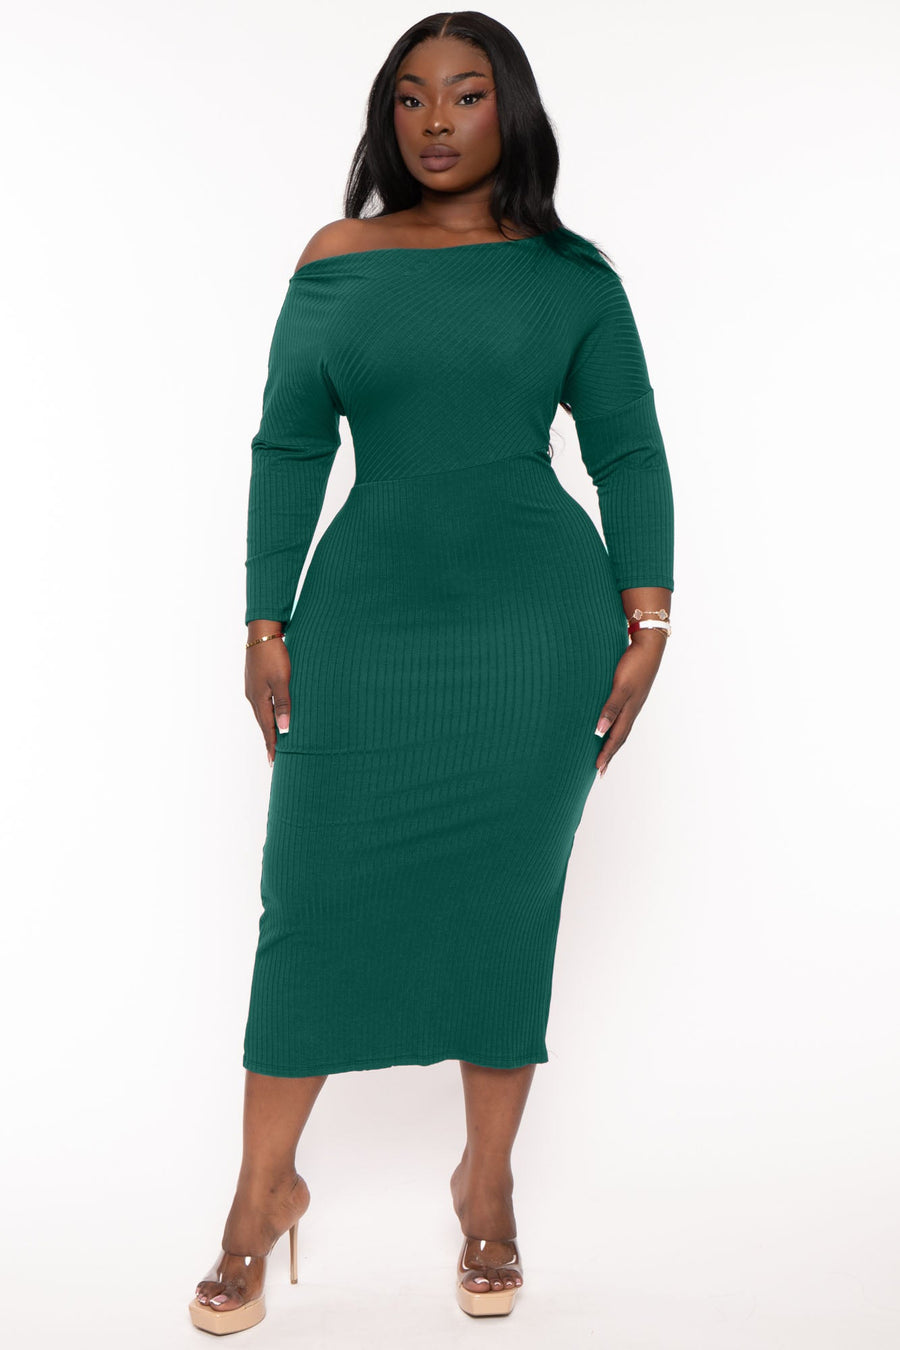 Curvy Sense - Trendy And Affordable Plus Size Dresses – Page 7